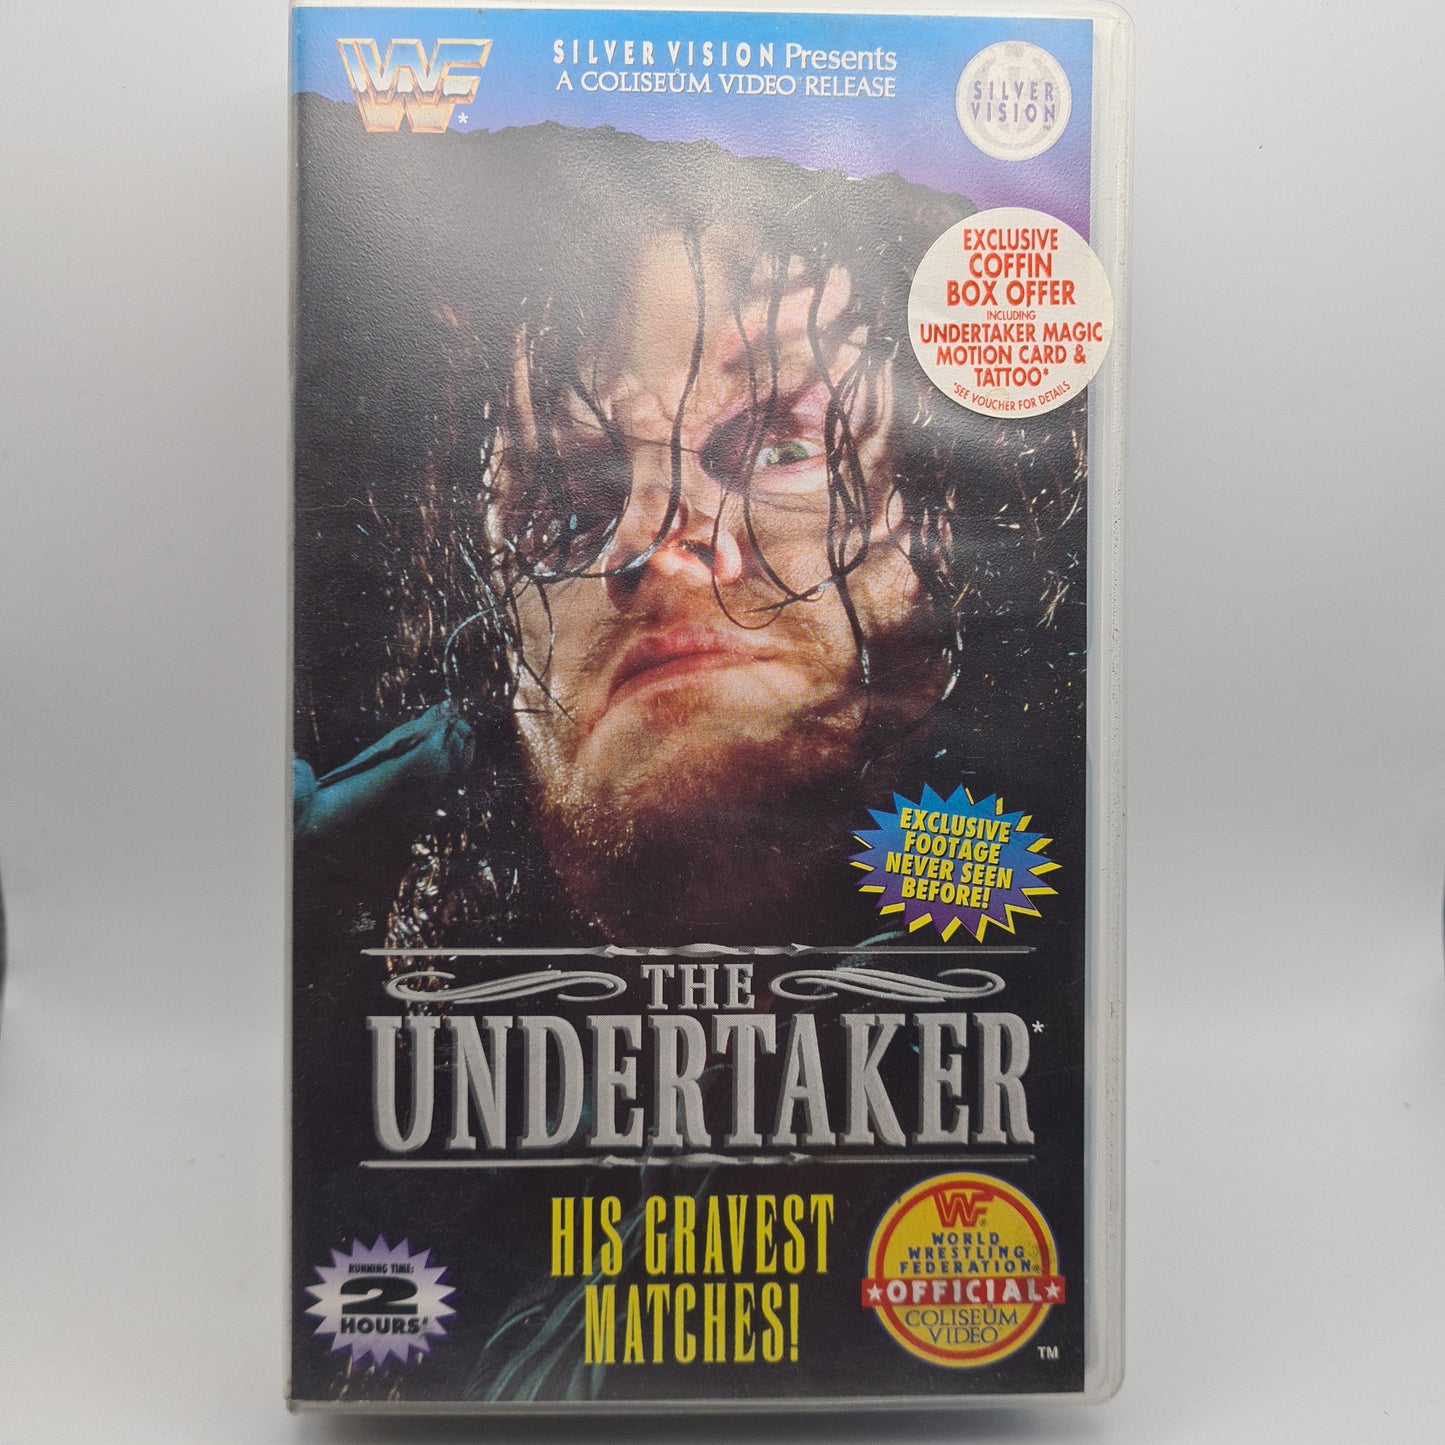 The Undertaker Gravest Matches VHS